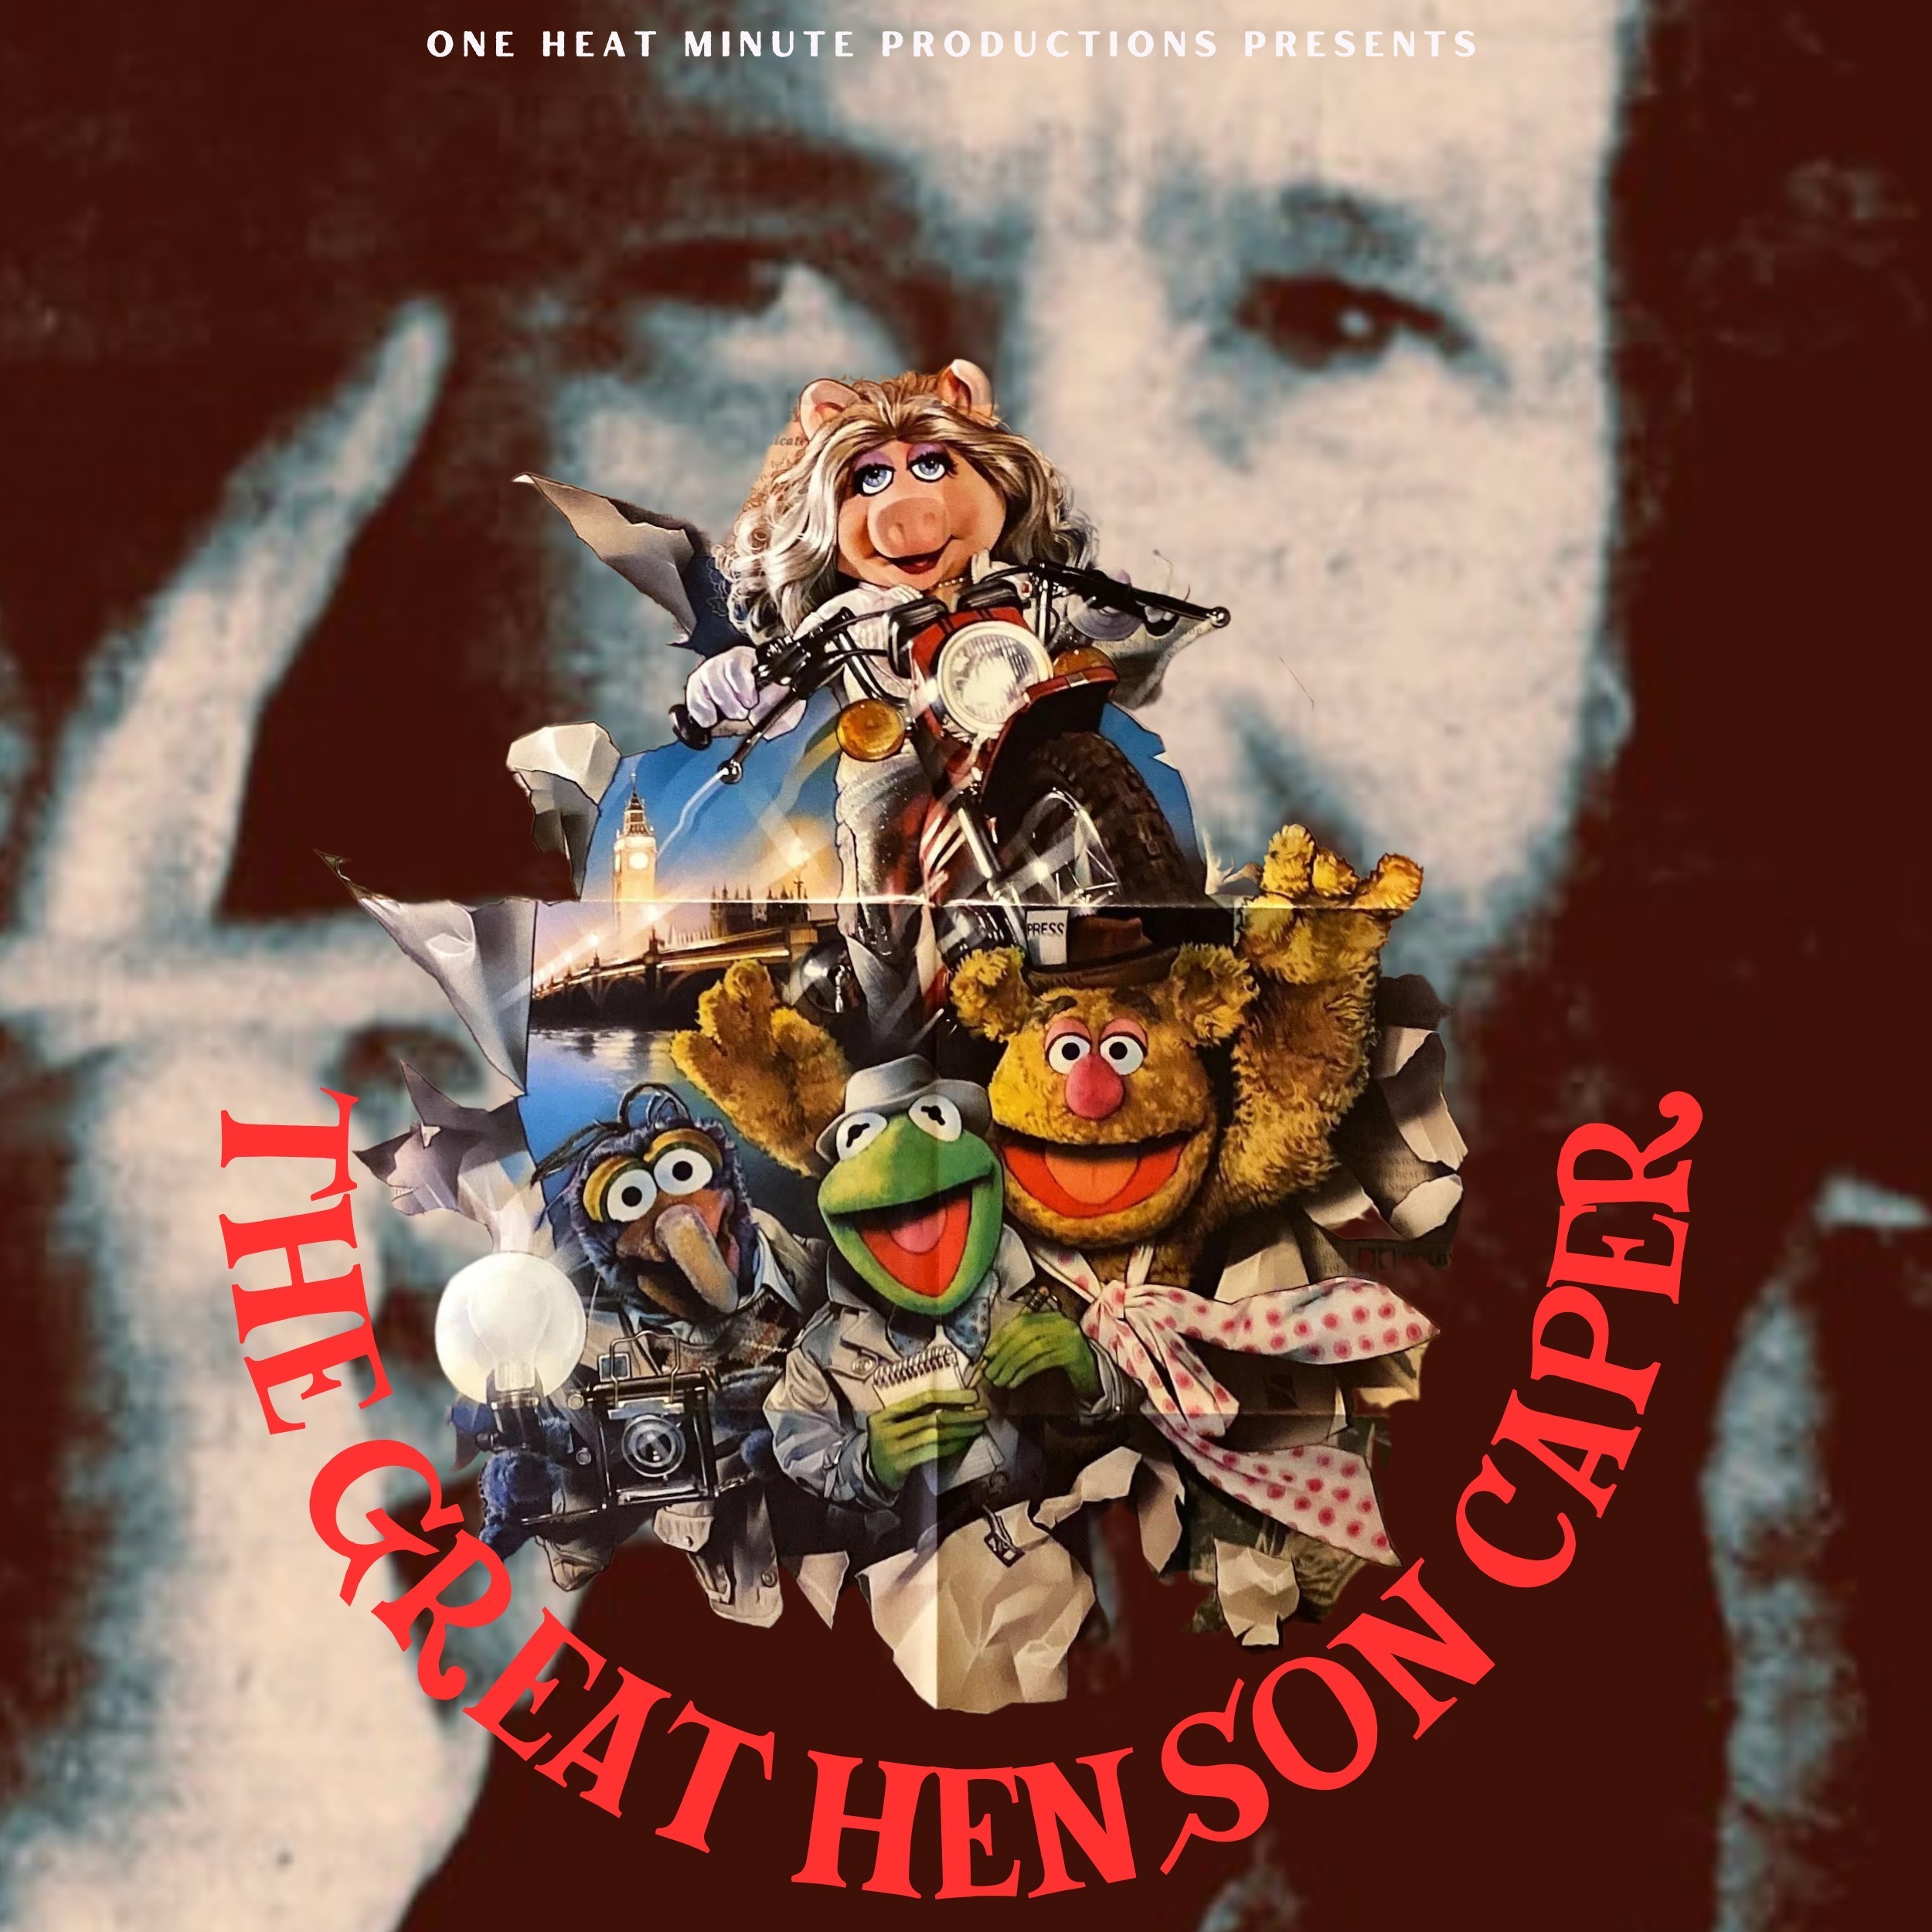 THE GREAT HENSON CAPER PART 7: FRAGGLE ROCK